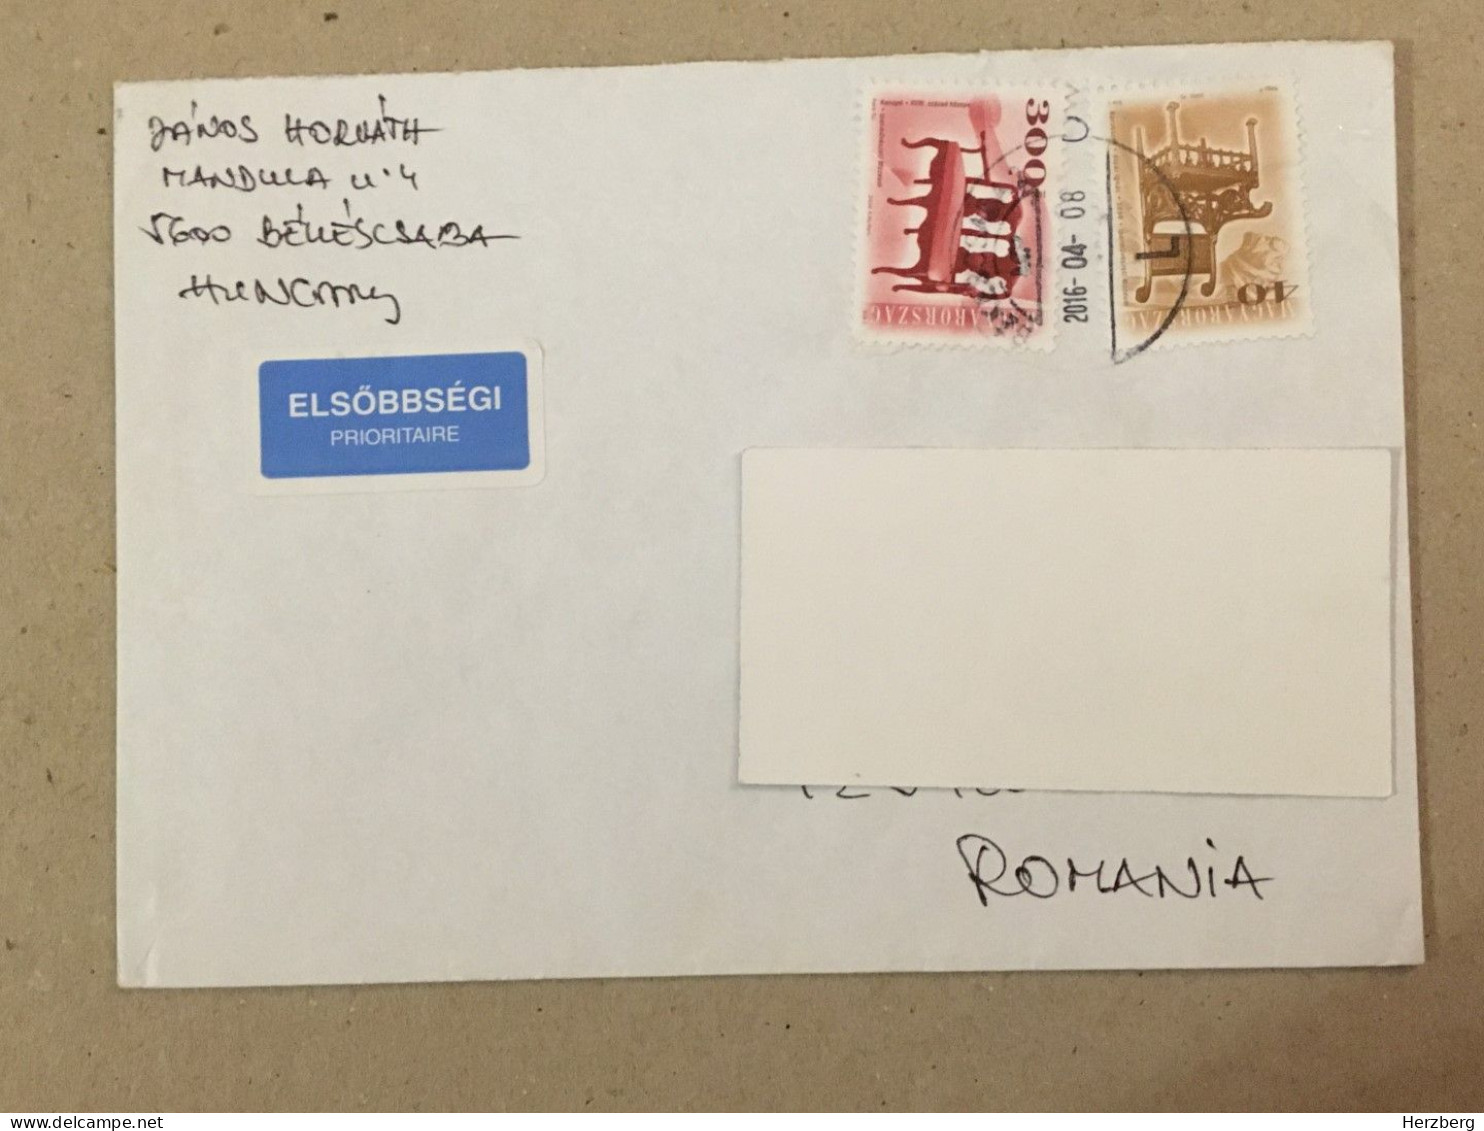 Hungary Magyarorszag Used Letter Stamp Cover Furniture Belle Epoque 2016 - Covers & Documents